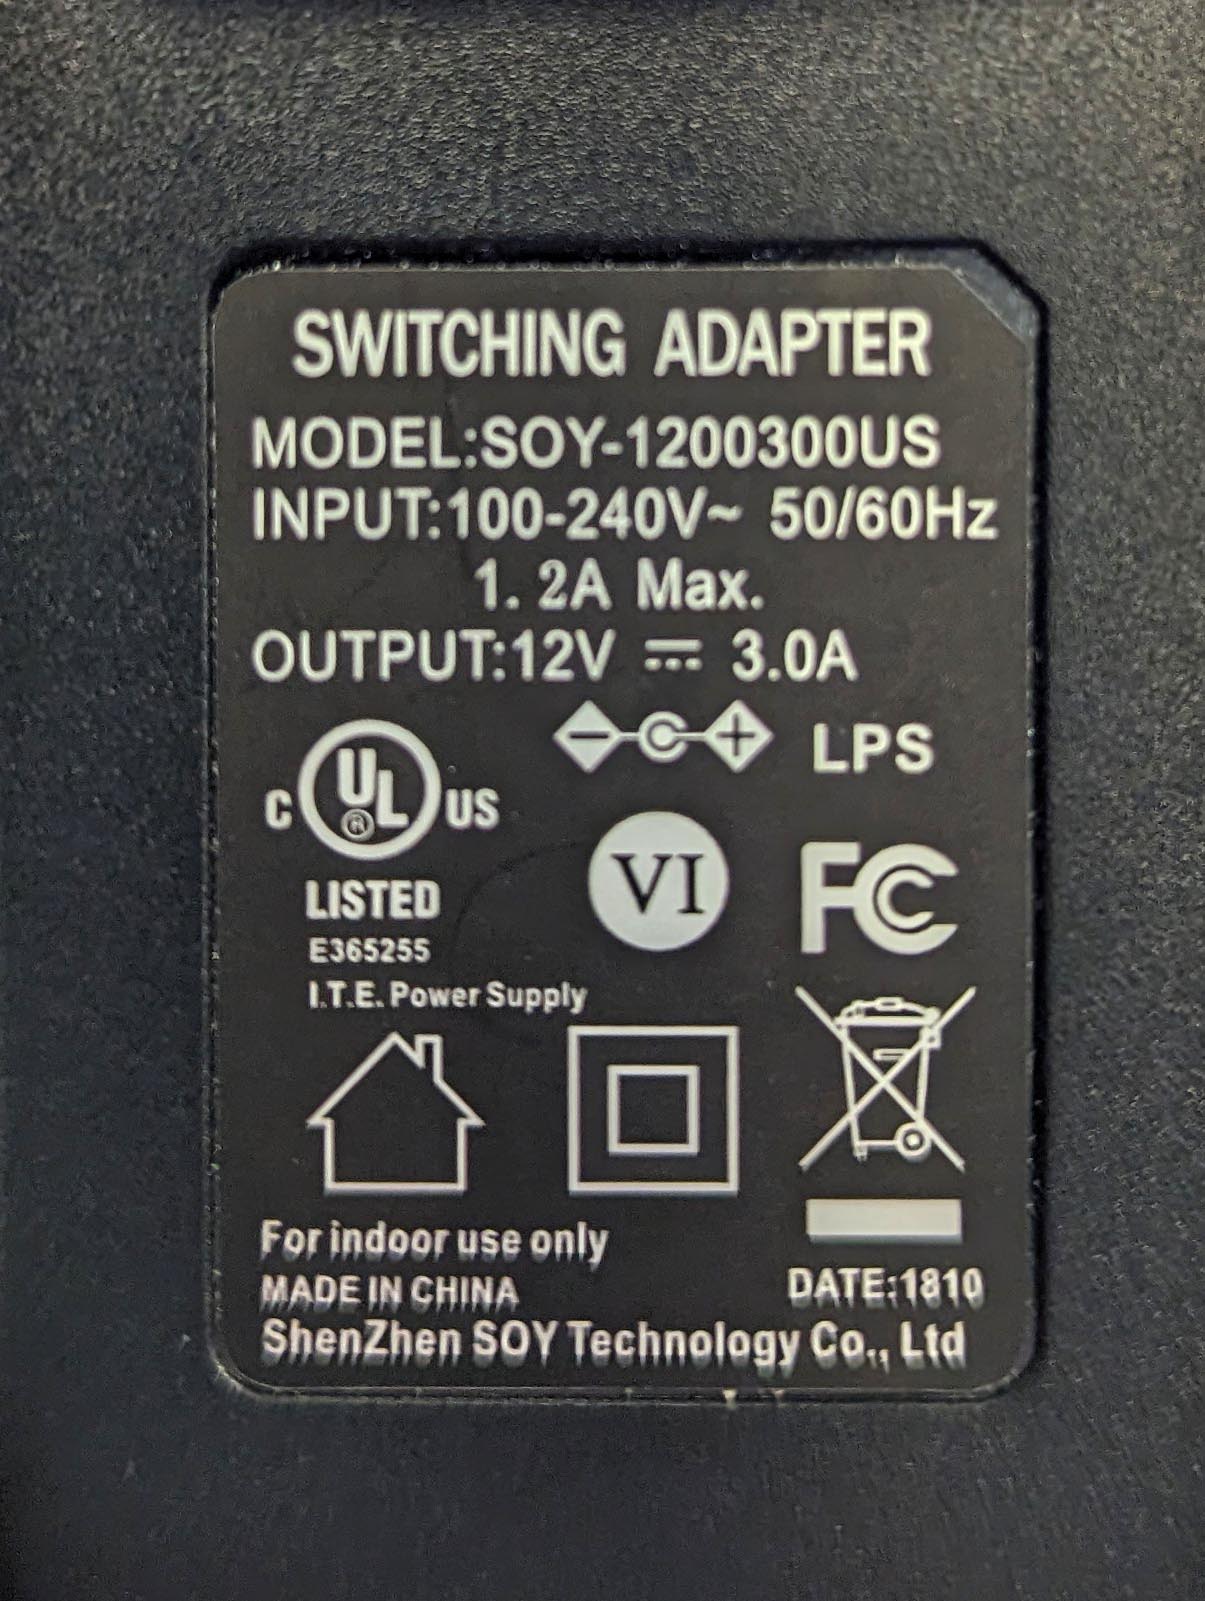 Image of Power Supply Input / Output Specs